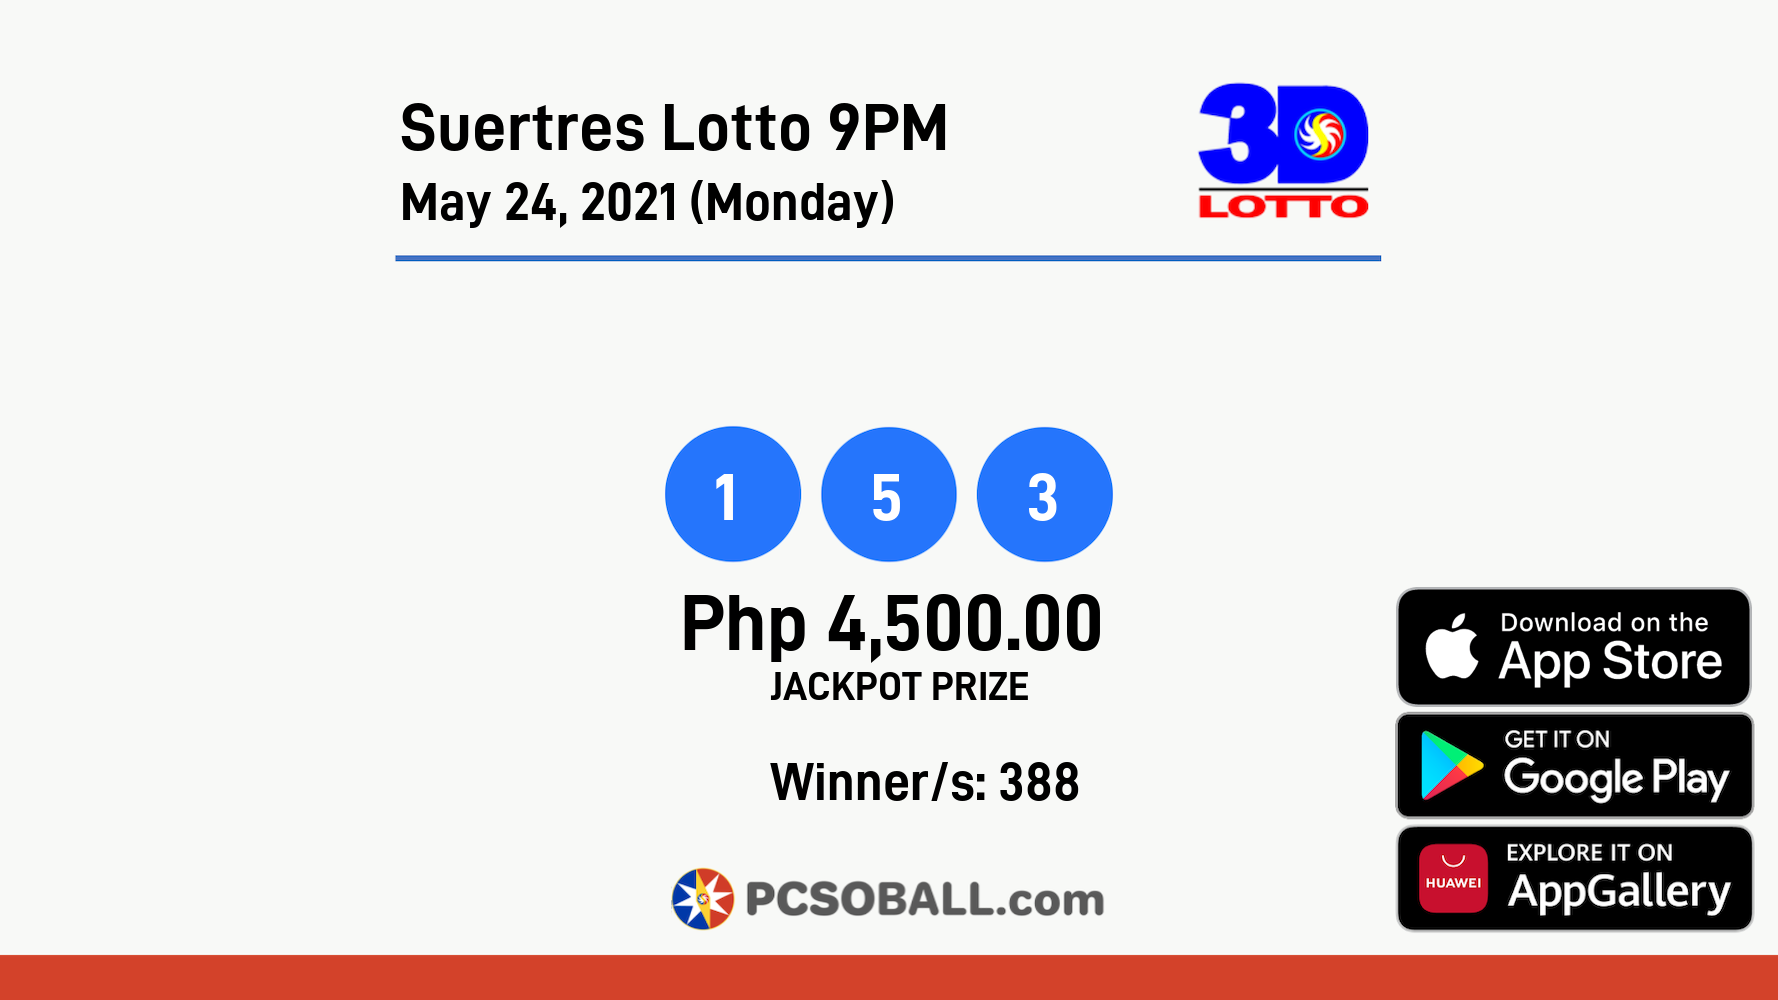 Suertres Lotto 9PM May 24, 2021 (Monday) Result